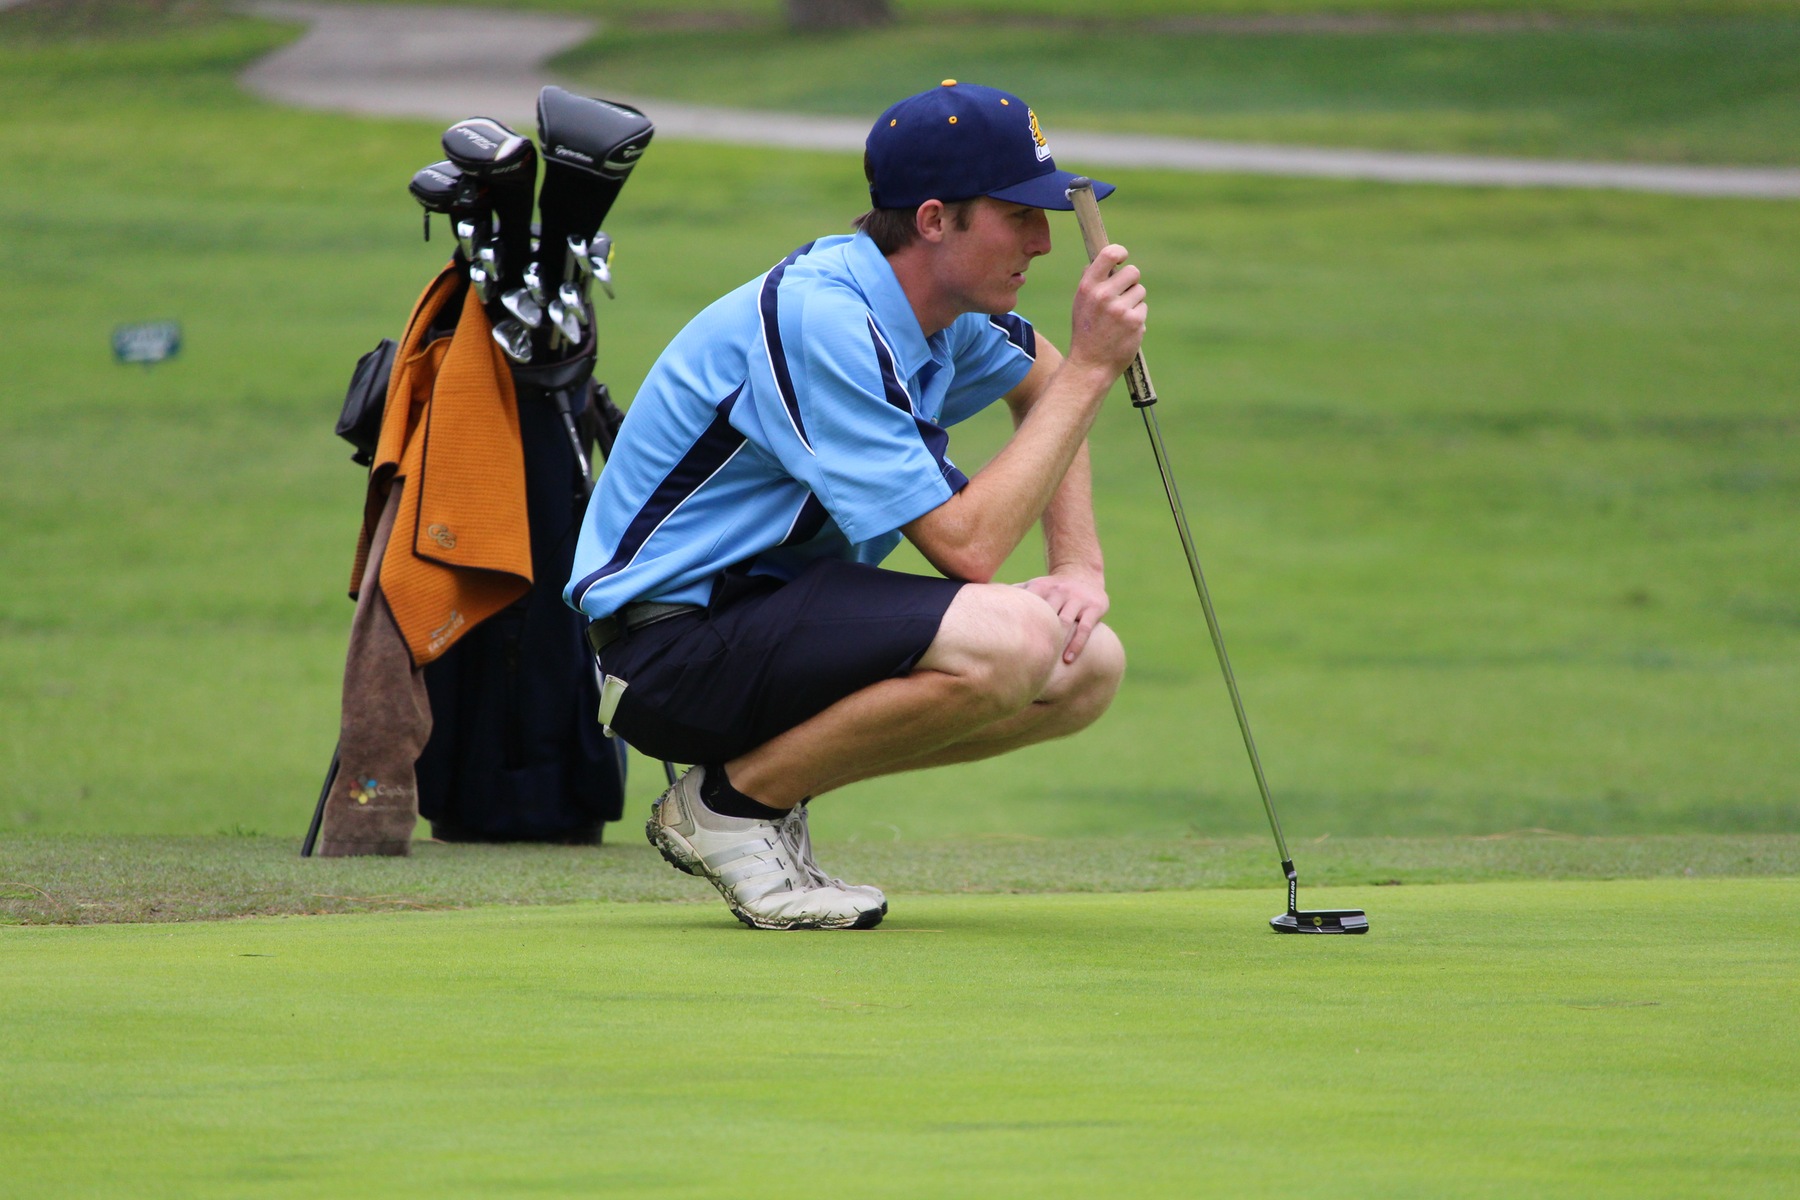 Men's Golf Sits Atop OEC Standings with Win at Candlewood